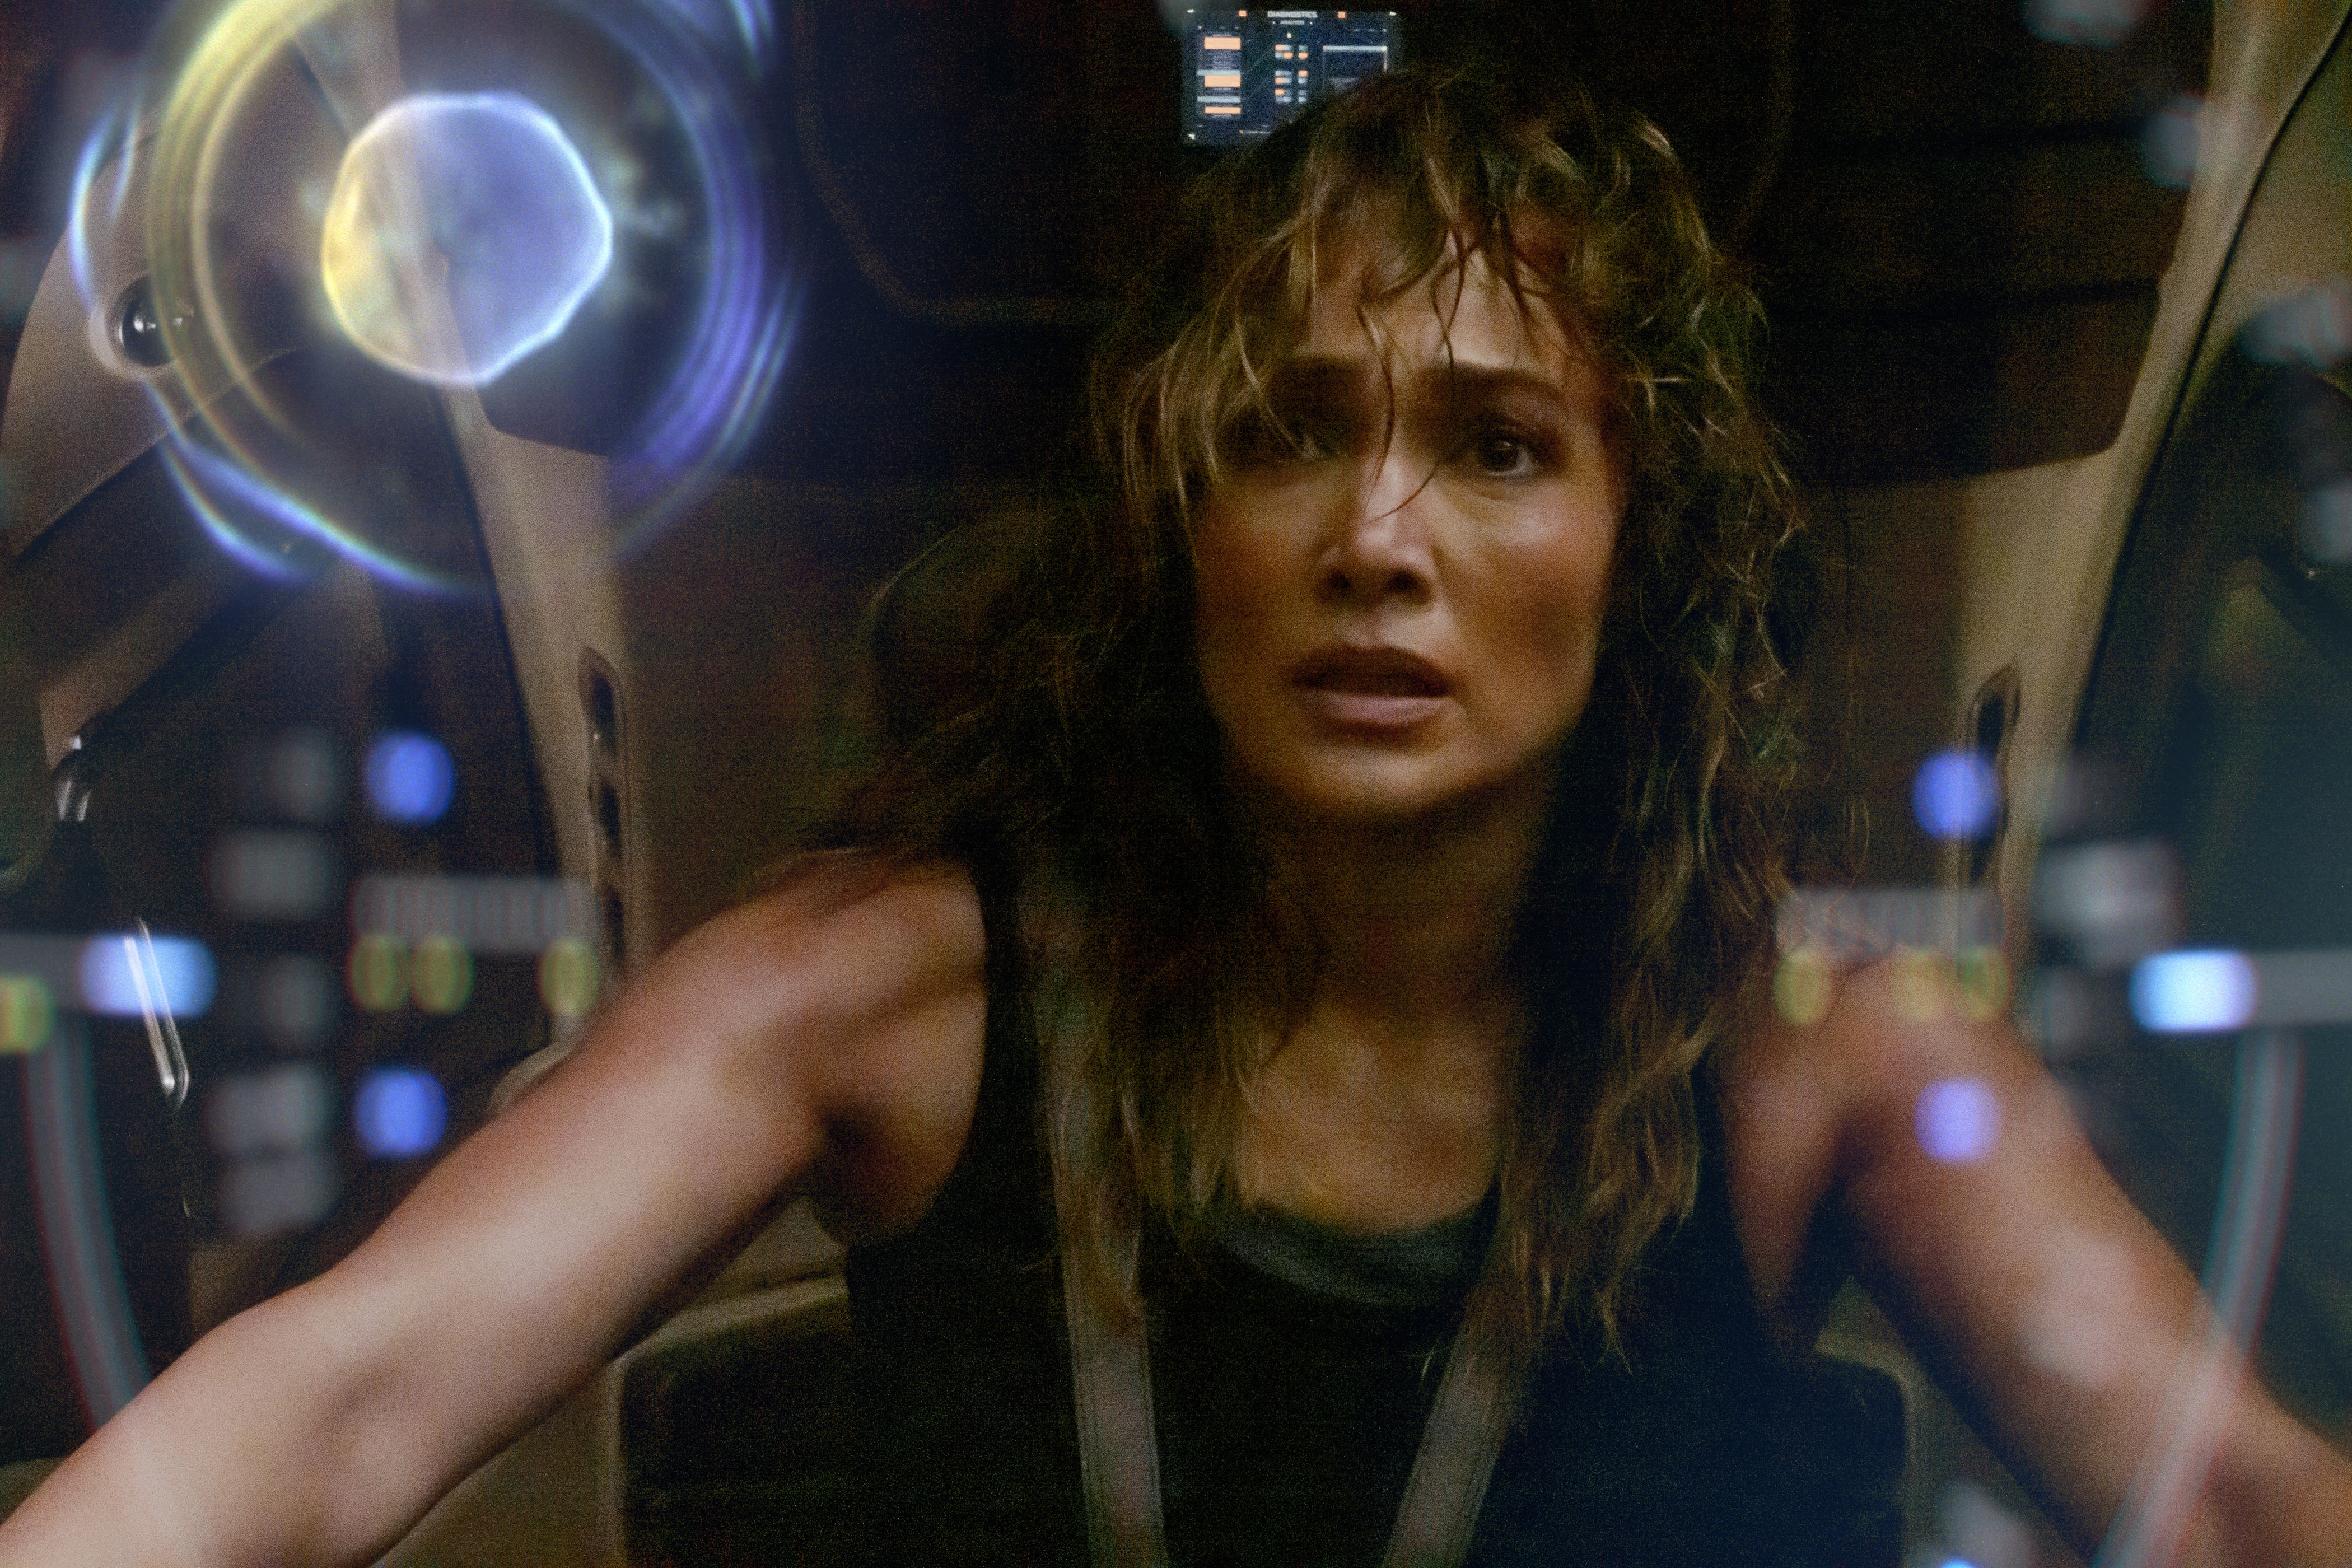 ‘Atlas’ Review: Jennifer Lopez’ Exo-Suit Fits Uncomfortably in This Shrug-Worthy Sci-Fi Vehicle